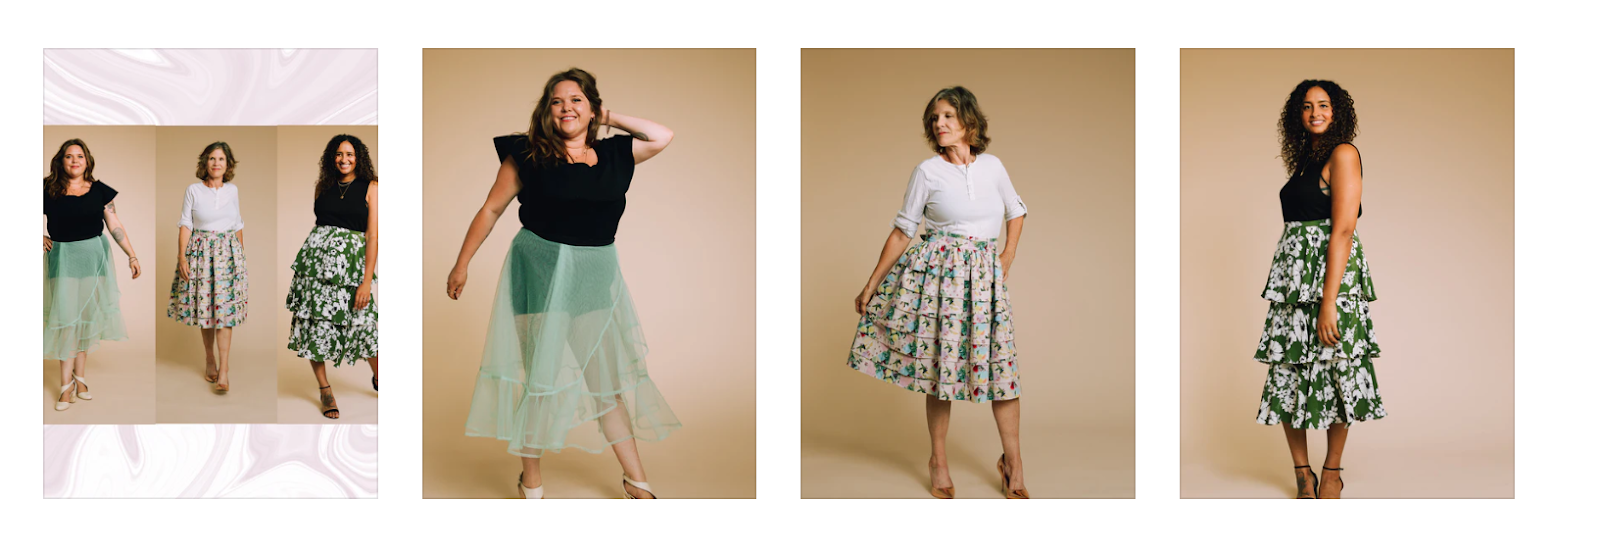 4 images one with three women wearing skirts and then three individual photos of each of the women